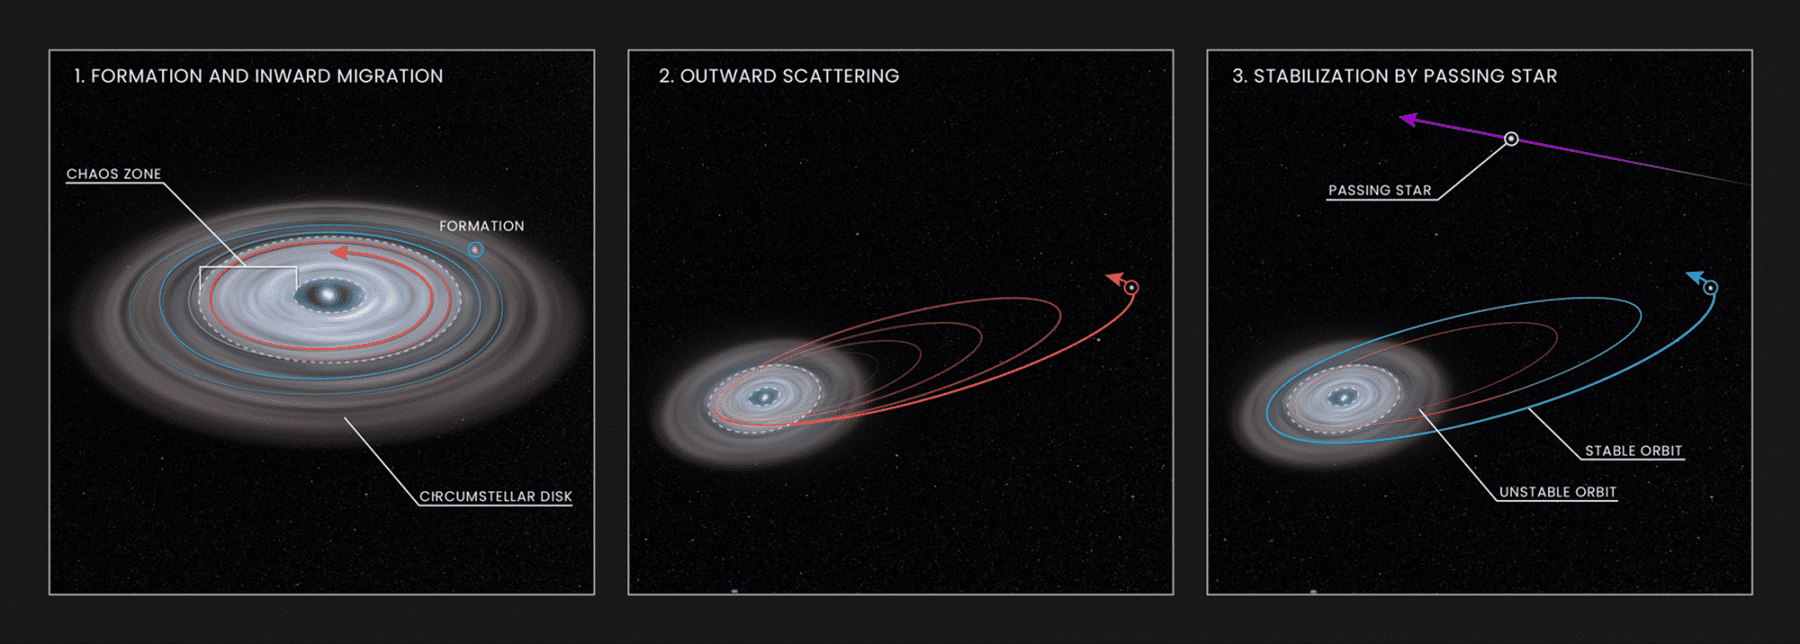 The image shows the likely scenario of HD 106906 b ending up in its unusual orbit. Credit: NASA, ESA, and L. Hustak (STScI)